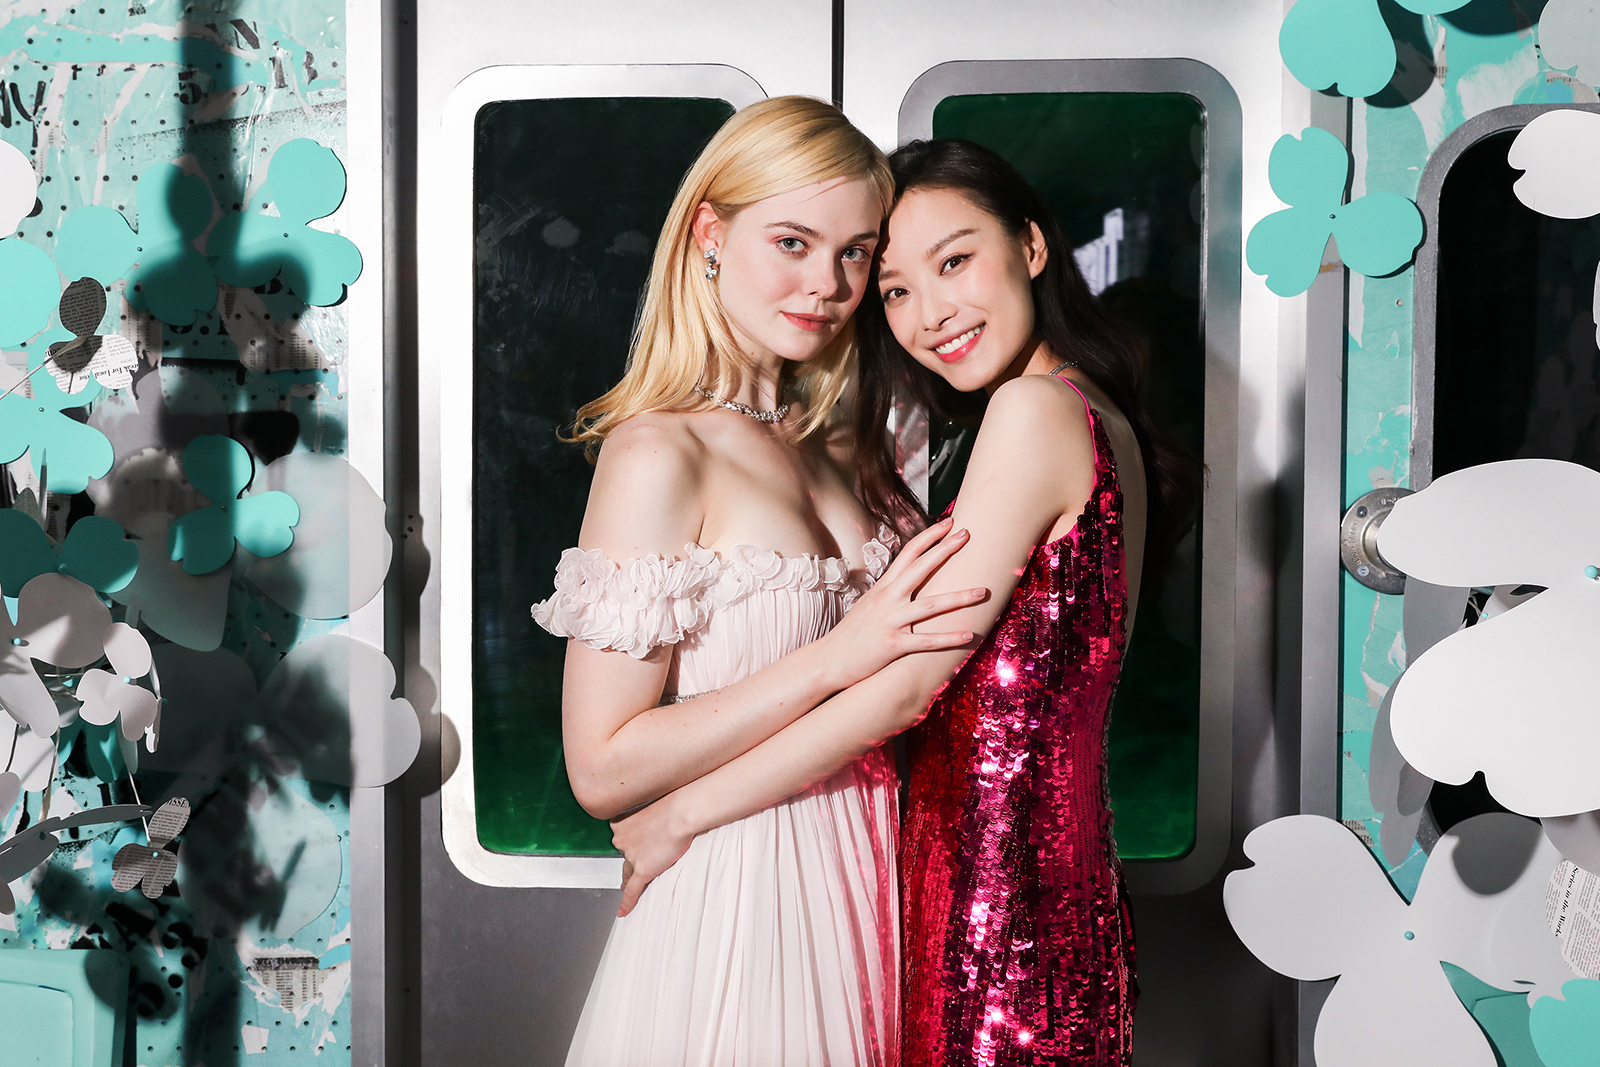 Tiffany & Co. 'Paper Flowers' event with brand ambassadors Elle Fanning and Ni Ni